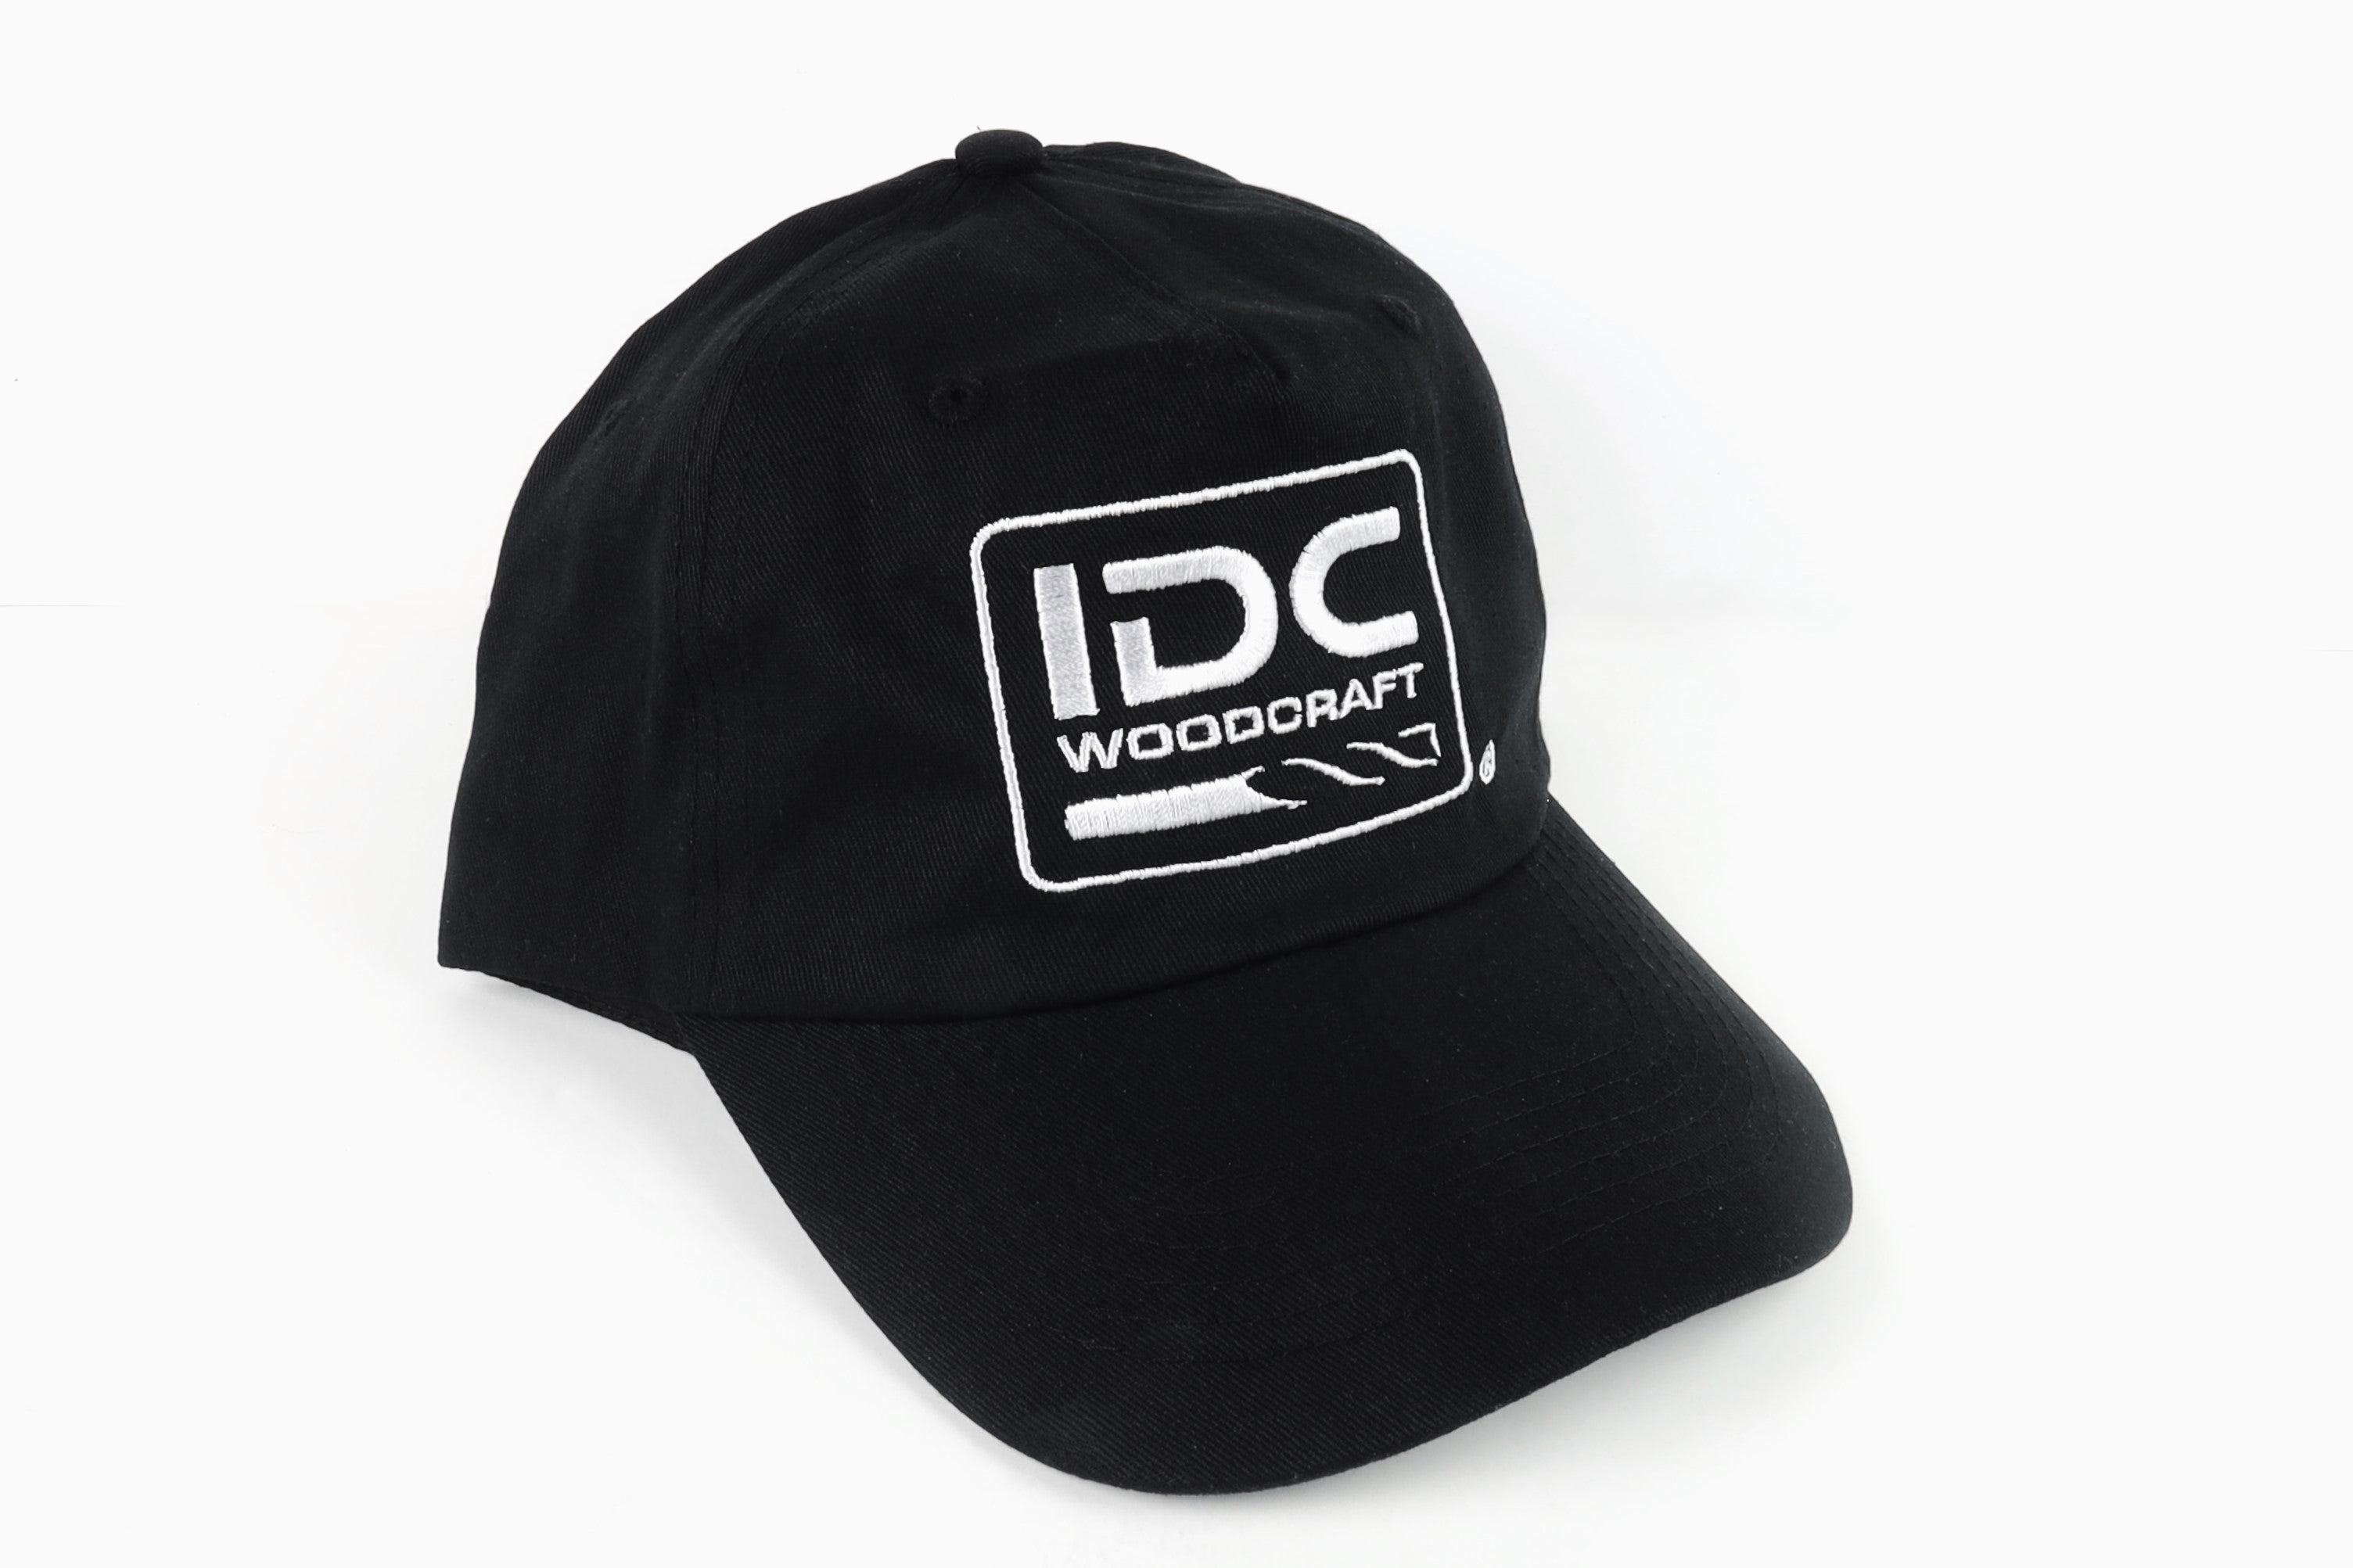 IDC Woodcraft Embroidered Ball Cap for CNC Enthusiasts